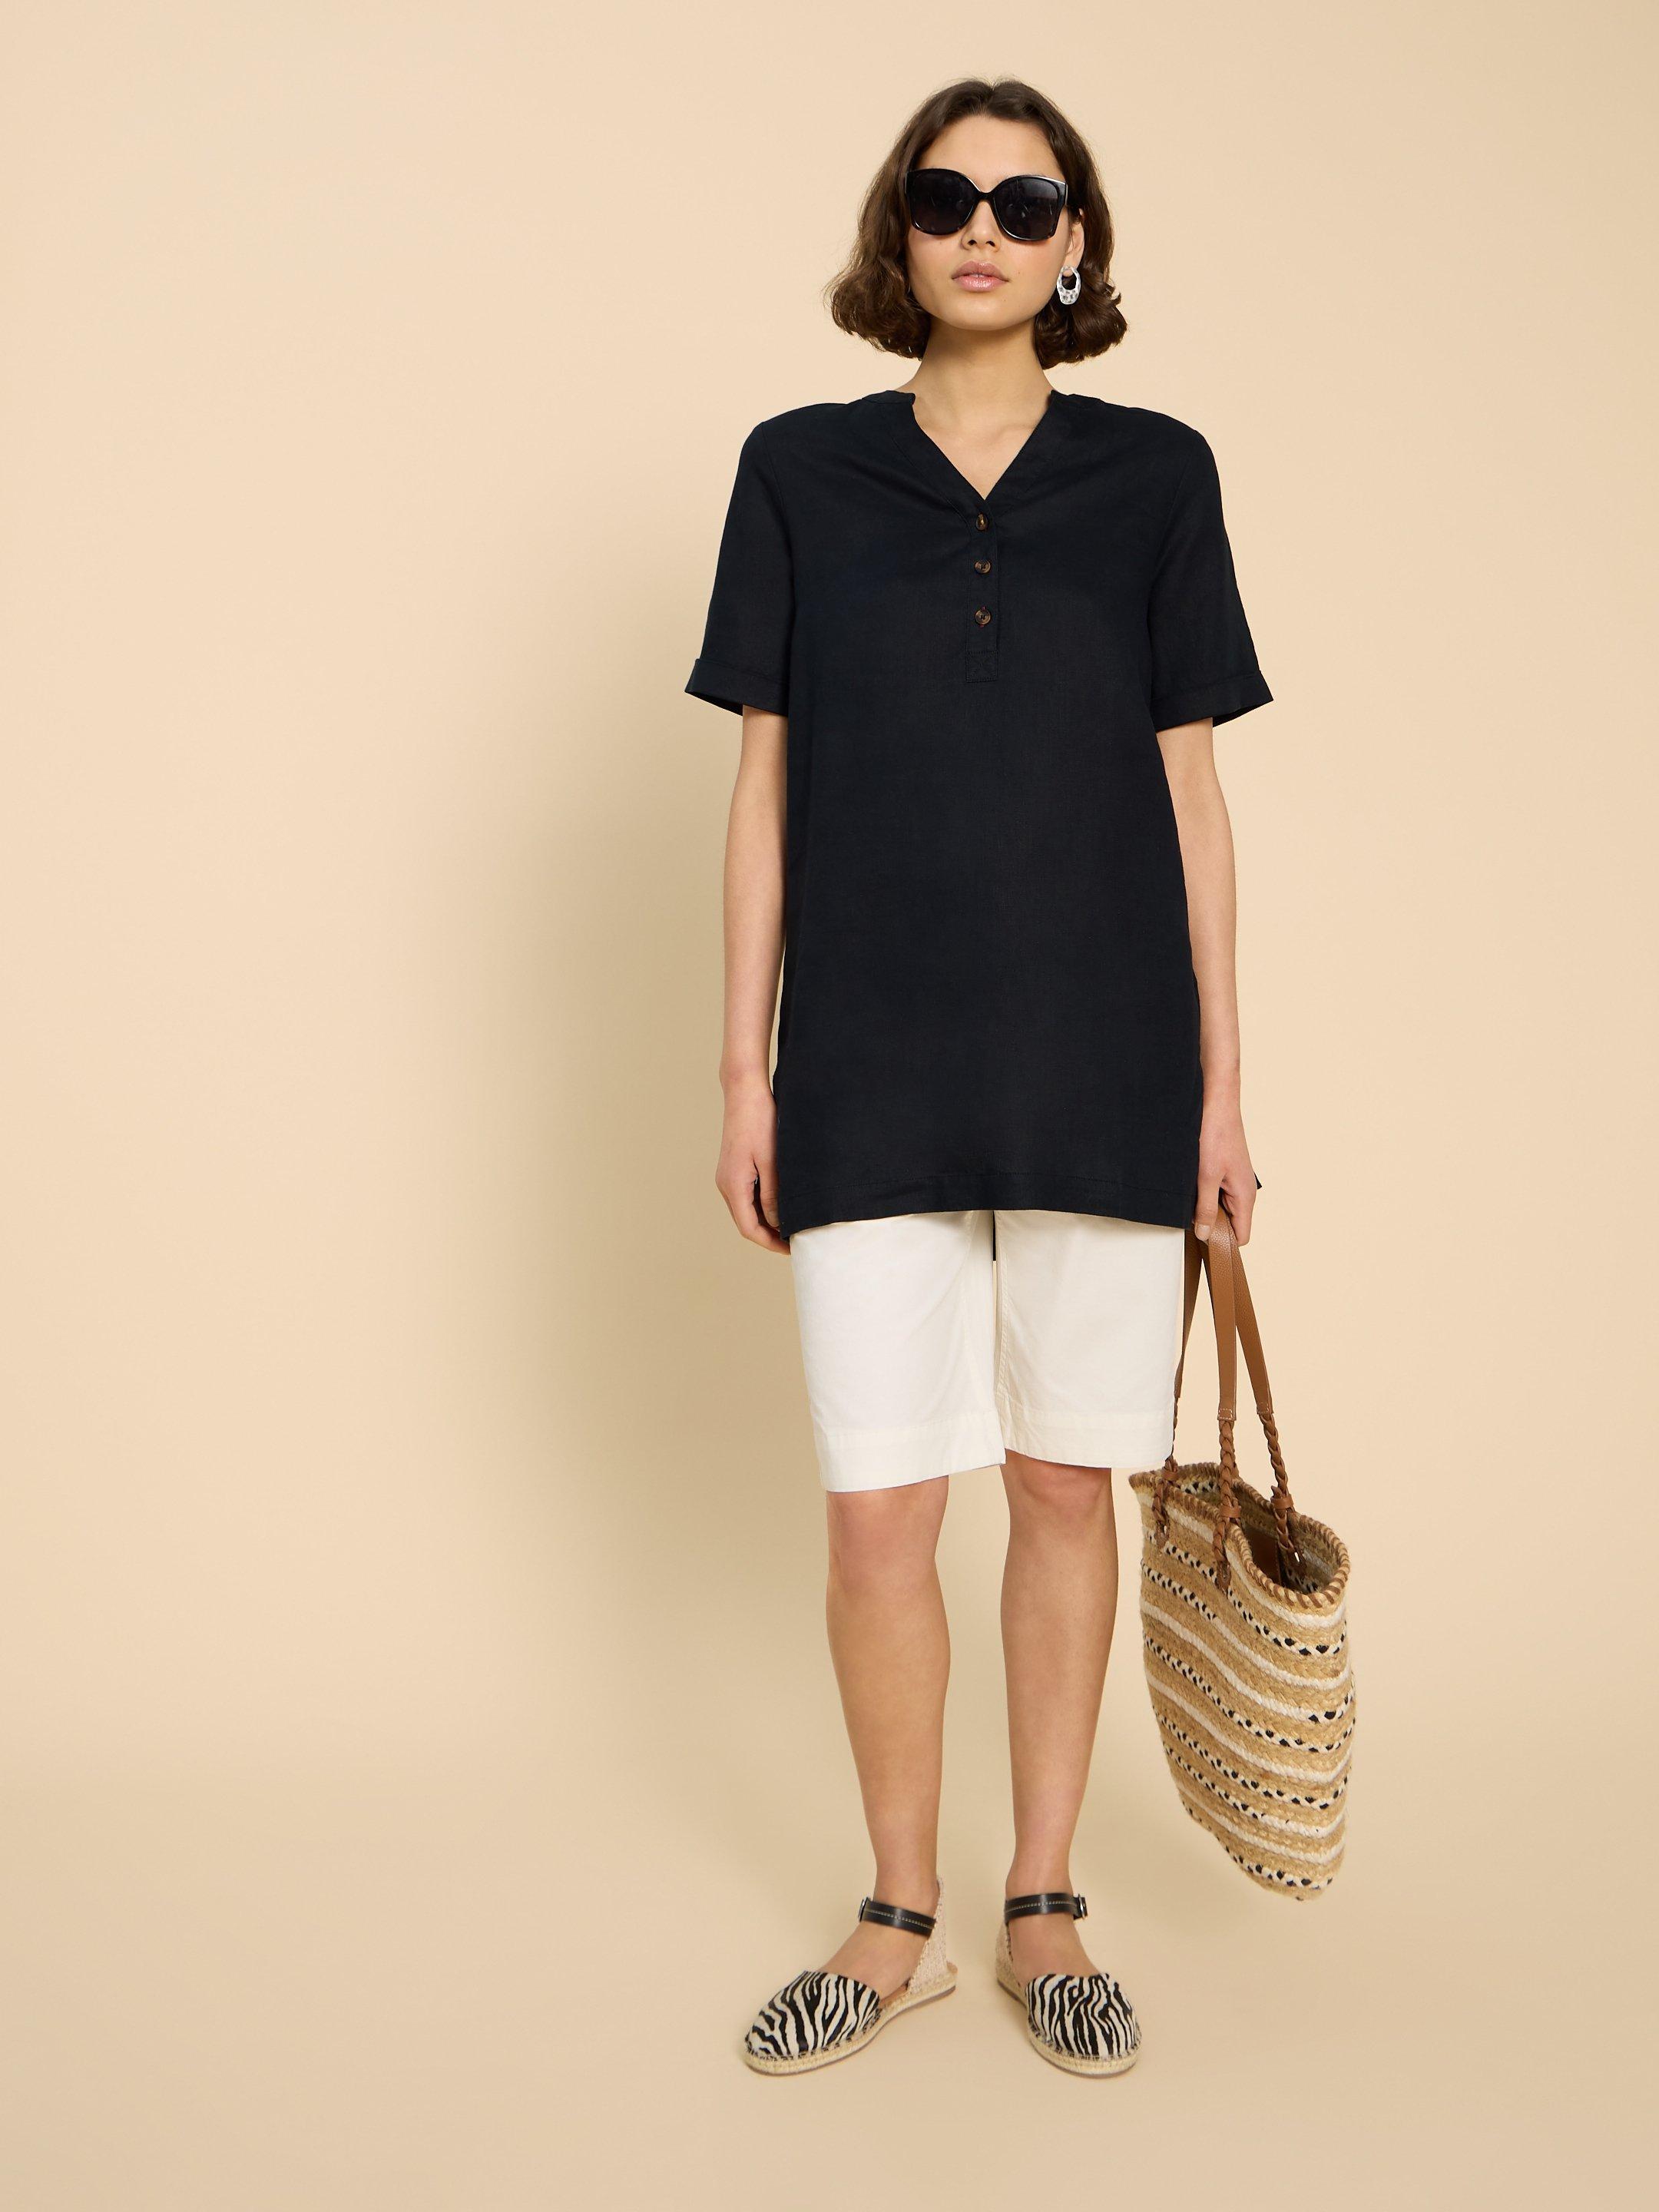 Lina Linen Tunic in PURE BLK - MODEL DETAIL